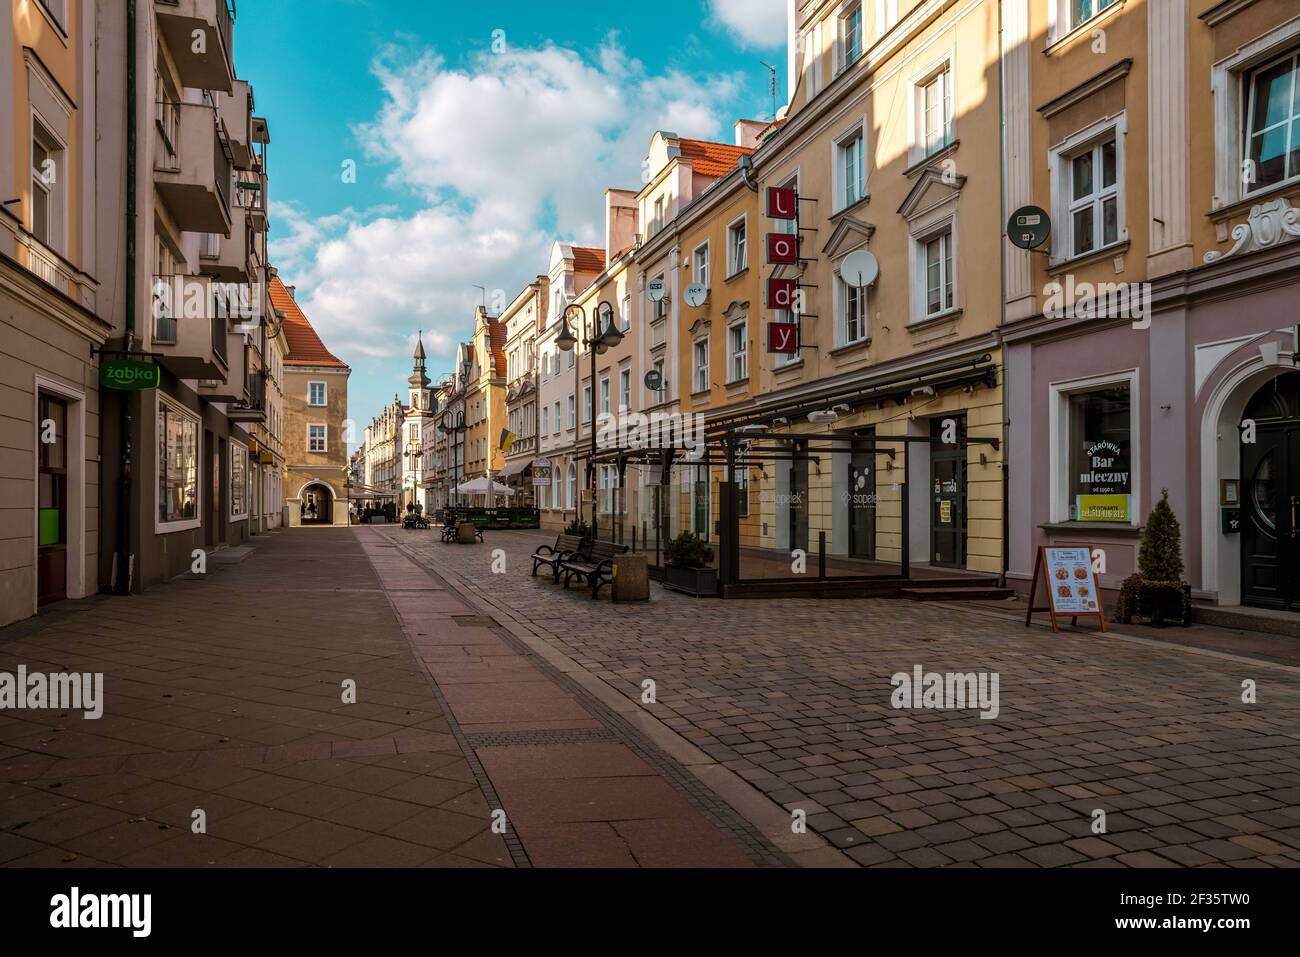 OPOLE, POLAND - Mar 06, 2021: a cobbled street in the city of Opole in Silesia with shops and tenement houses Stock Photo